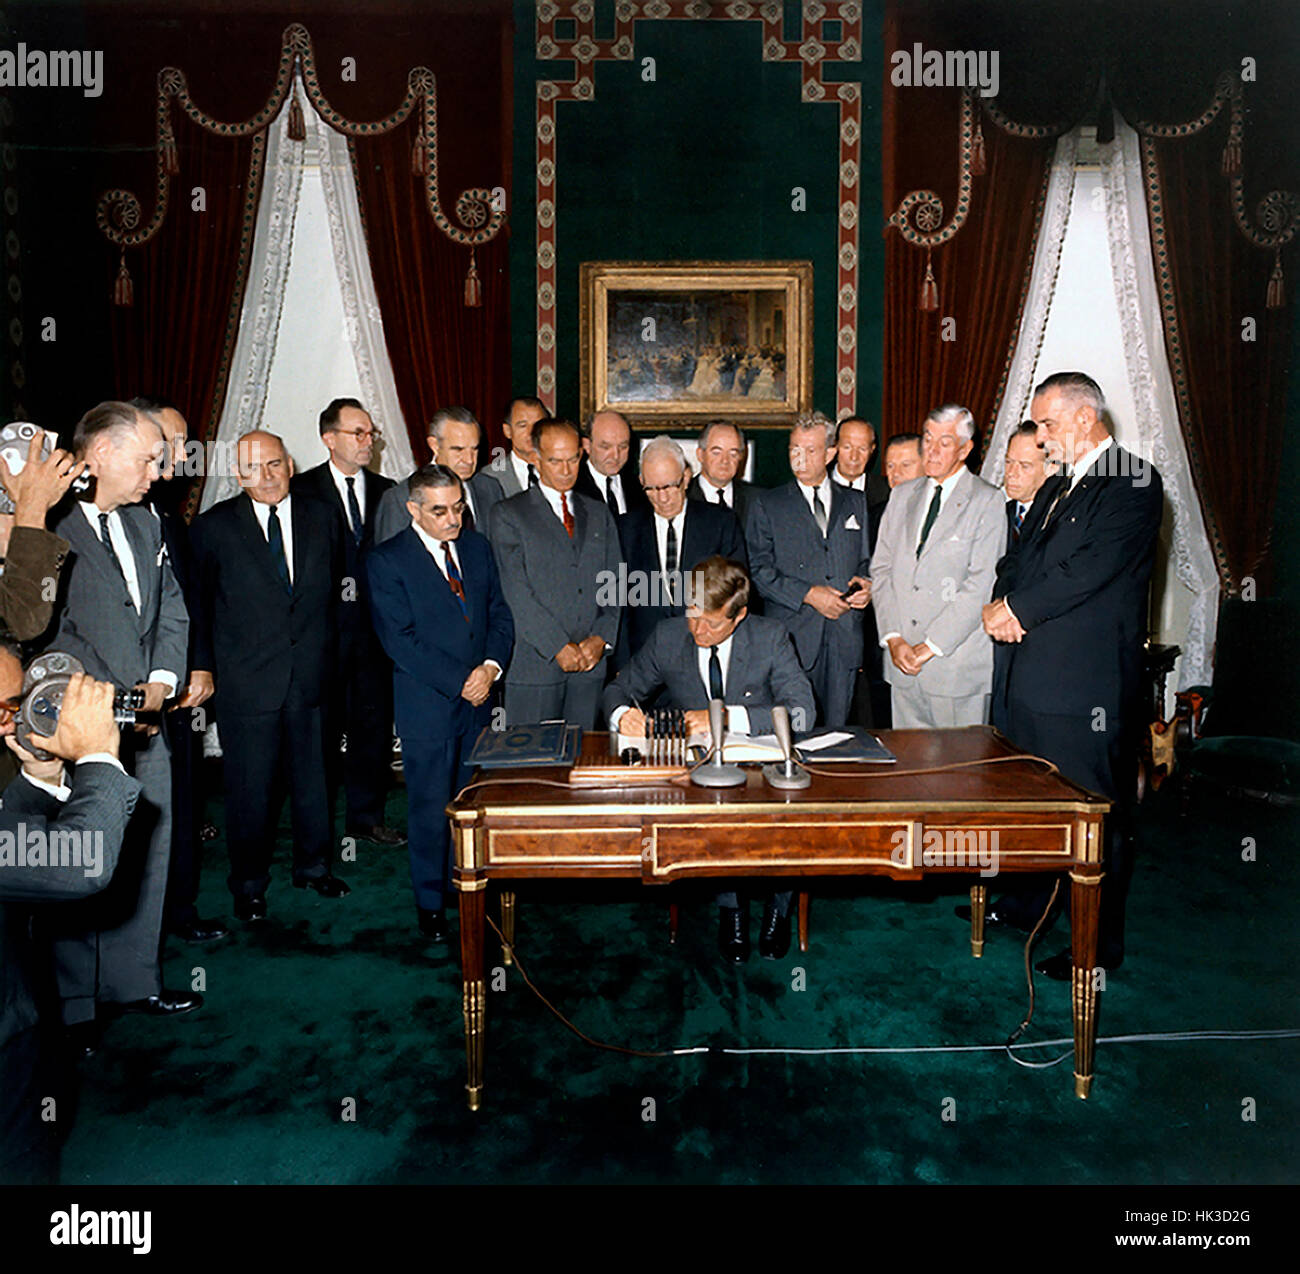 United States President John F. Kennedy signs the Limited Nuclear Test Ban Treaty in the White House Treaty Room on October 7, 1963. From left to right: William Hopkins, U.S. Senator Mike Mansfield (Democrat of Montana), John J. McCloy, Adrian S. Fisher, Stock Photo